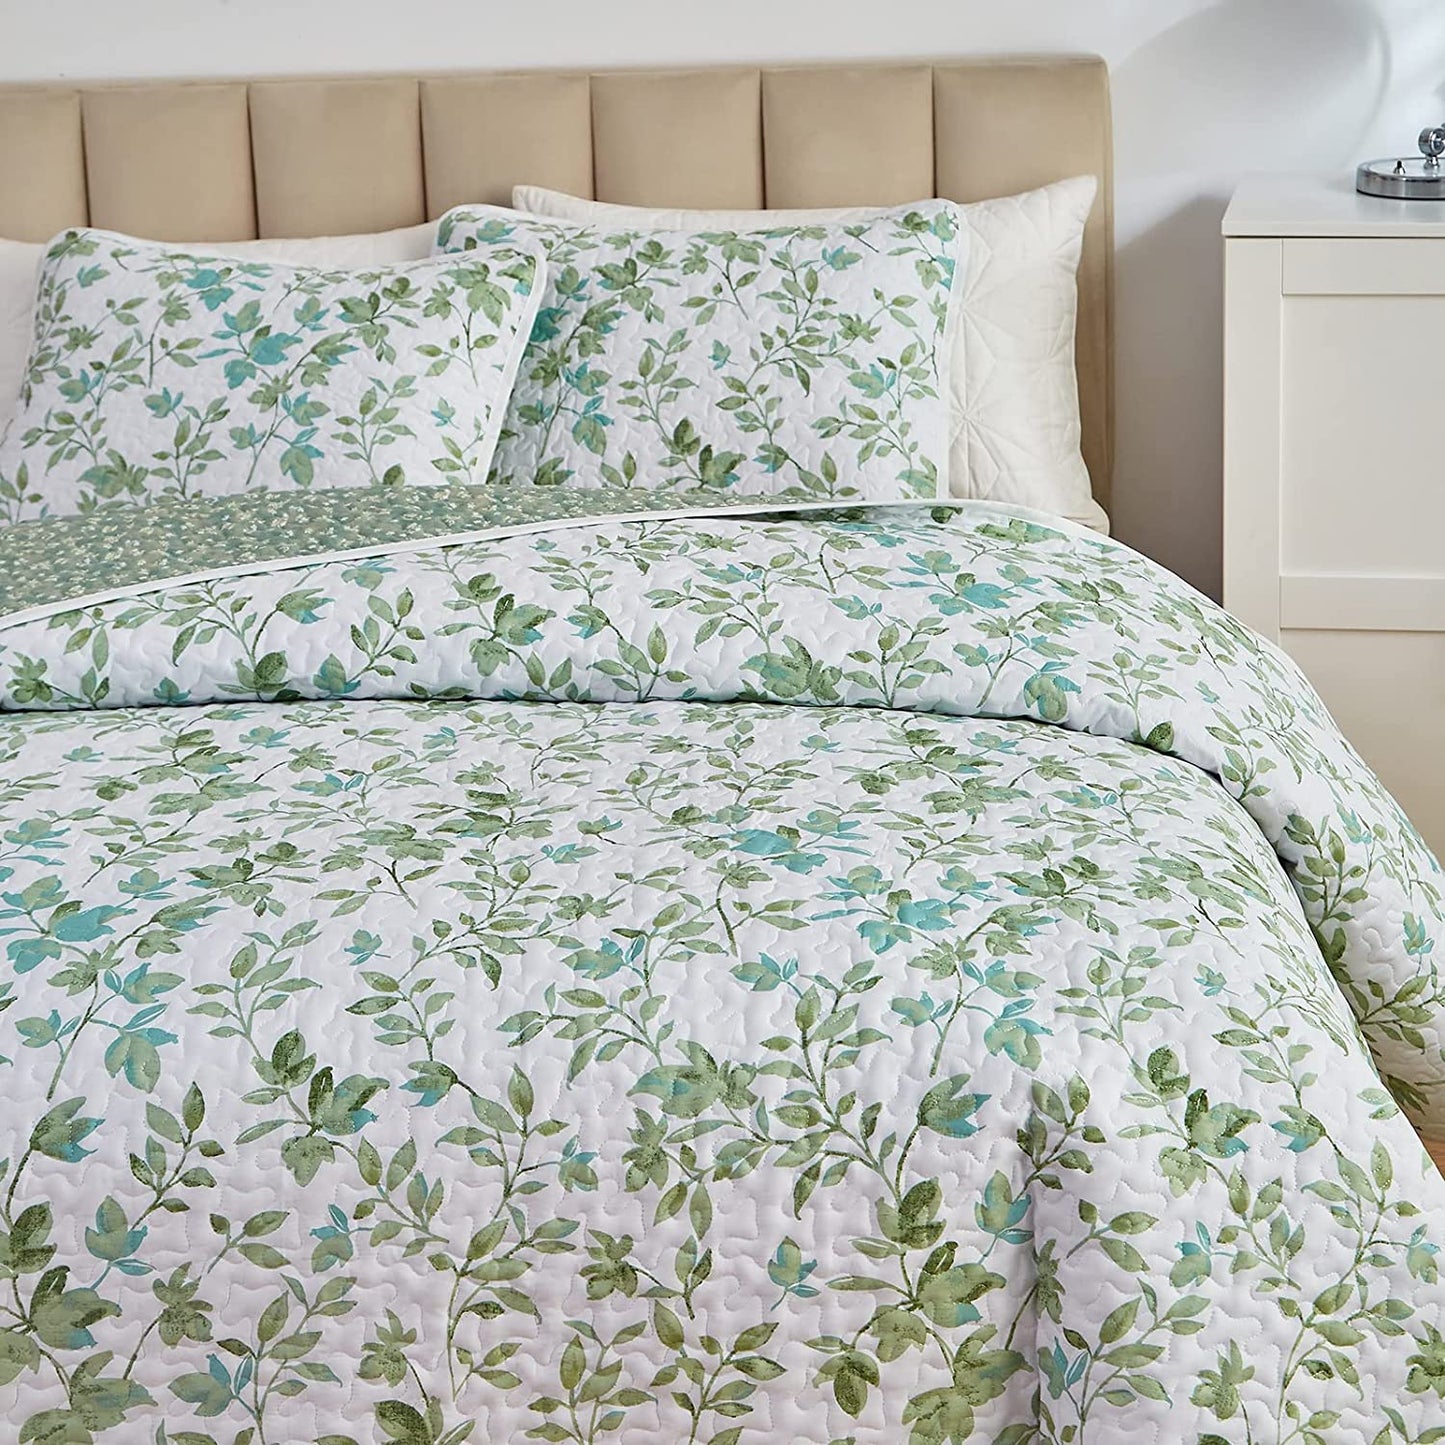 Botanical Green and White Quilt Set 3 Pieces Leaves Reversible Bedding Set with 2 Pillowcases